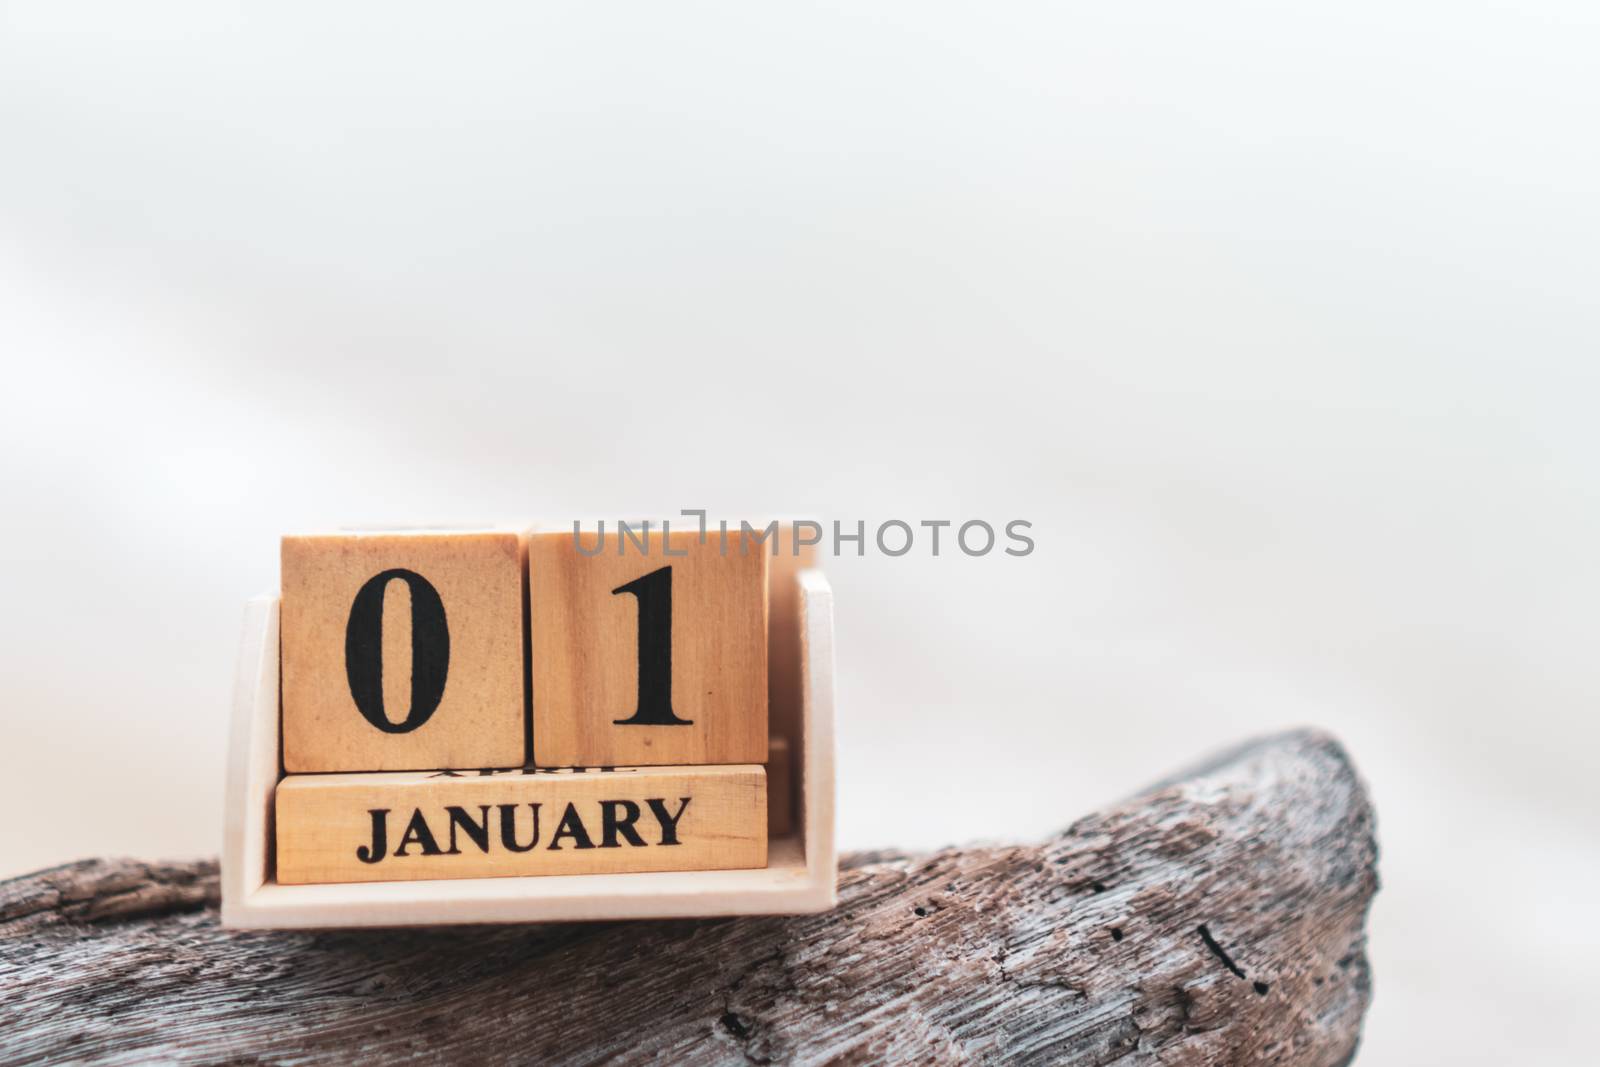 Wood brick block show date and month calendar of 1st January or New year day. Celebration and holiday long weekend season concept.